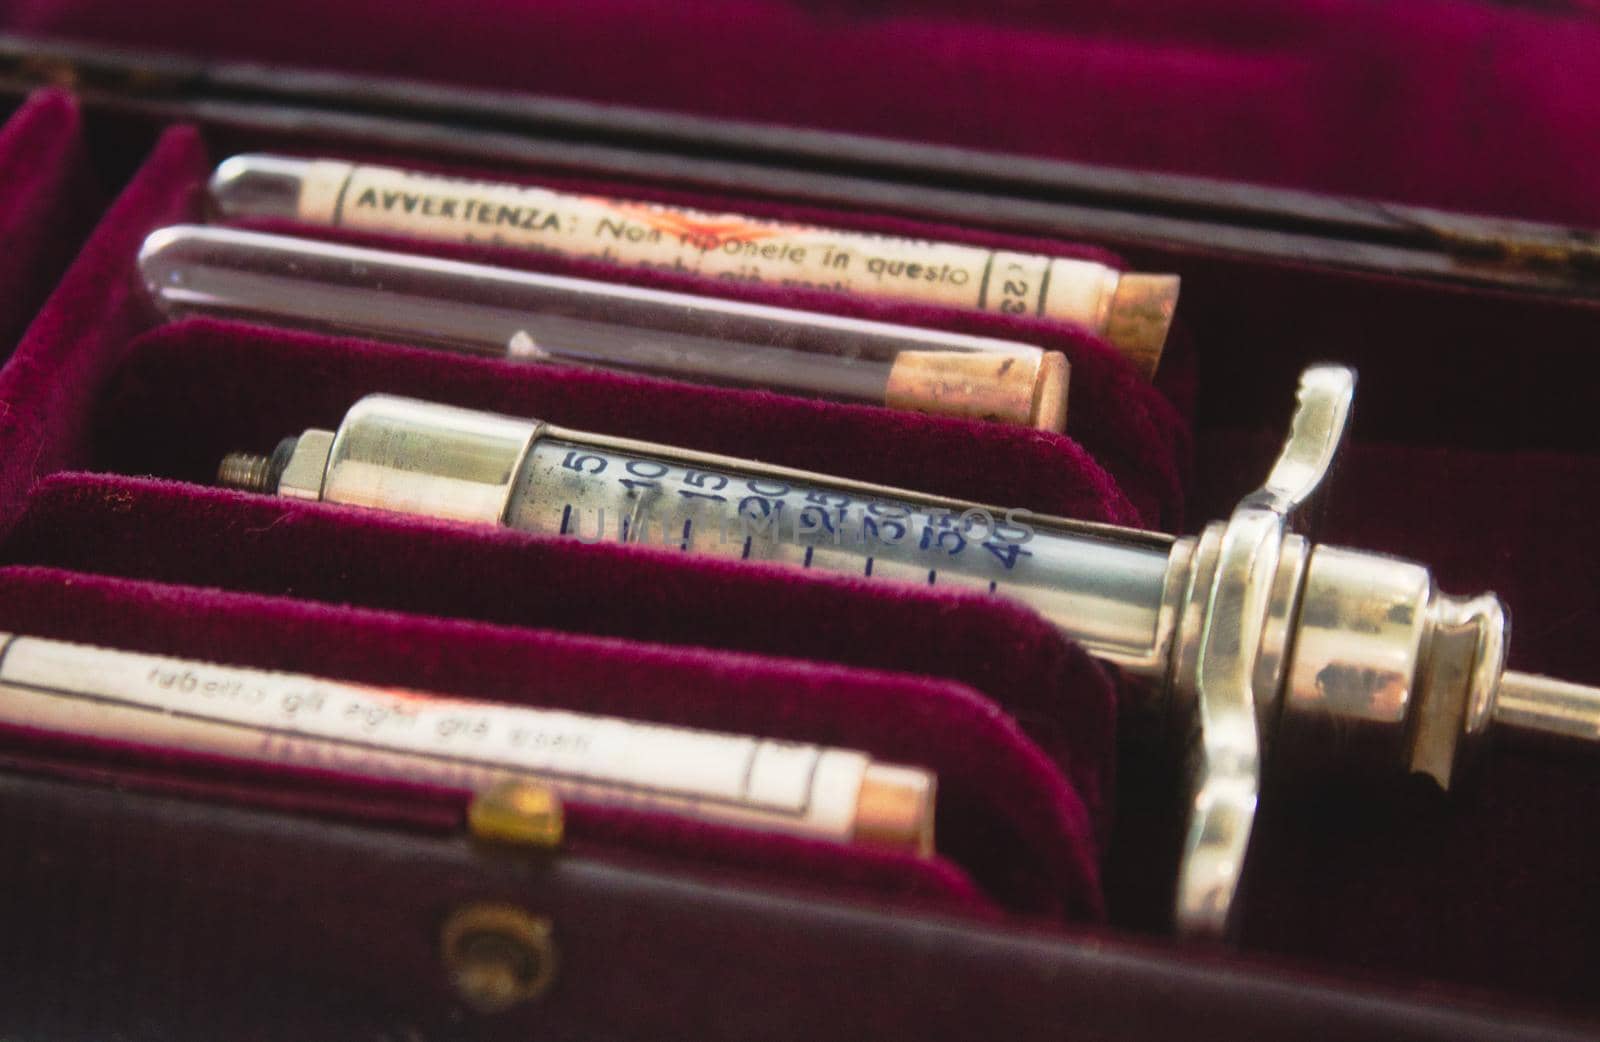 Old-fashioned syringe in a red case